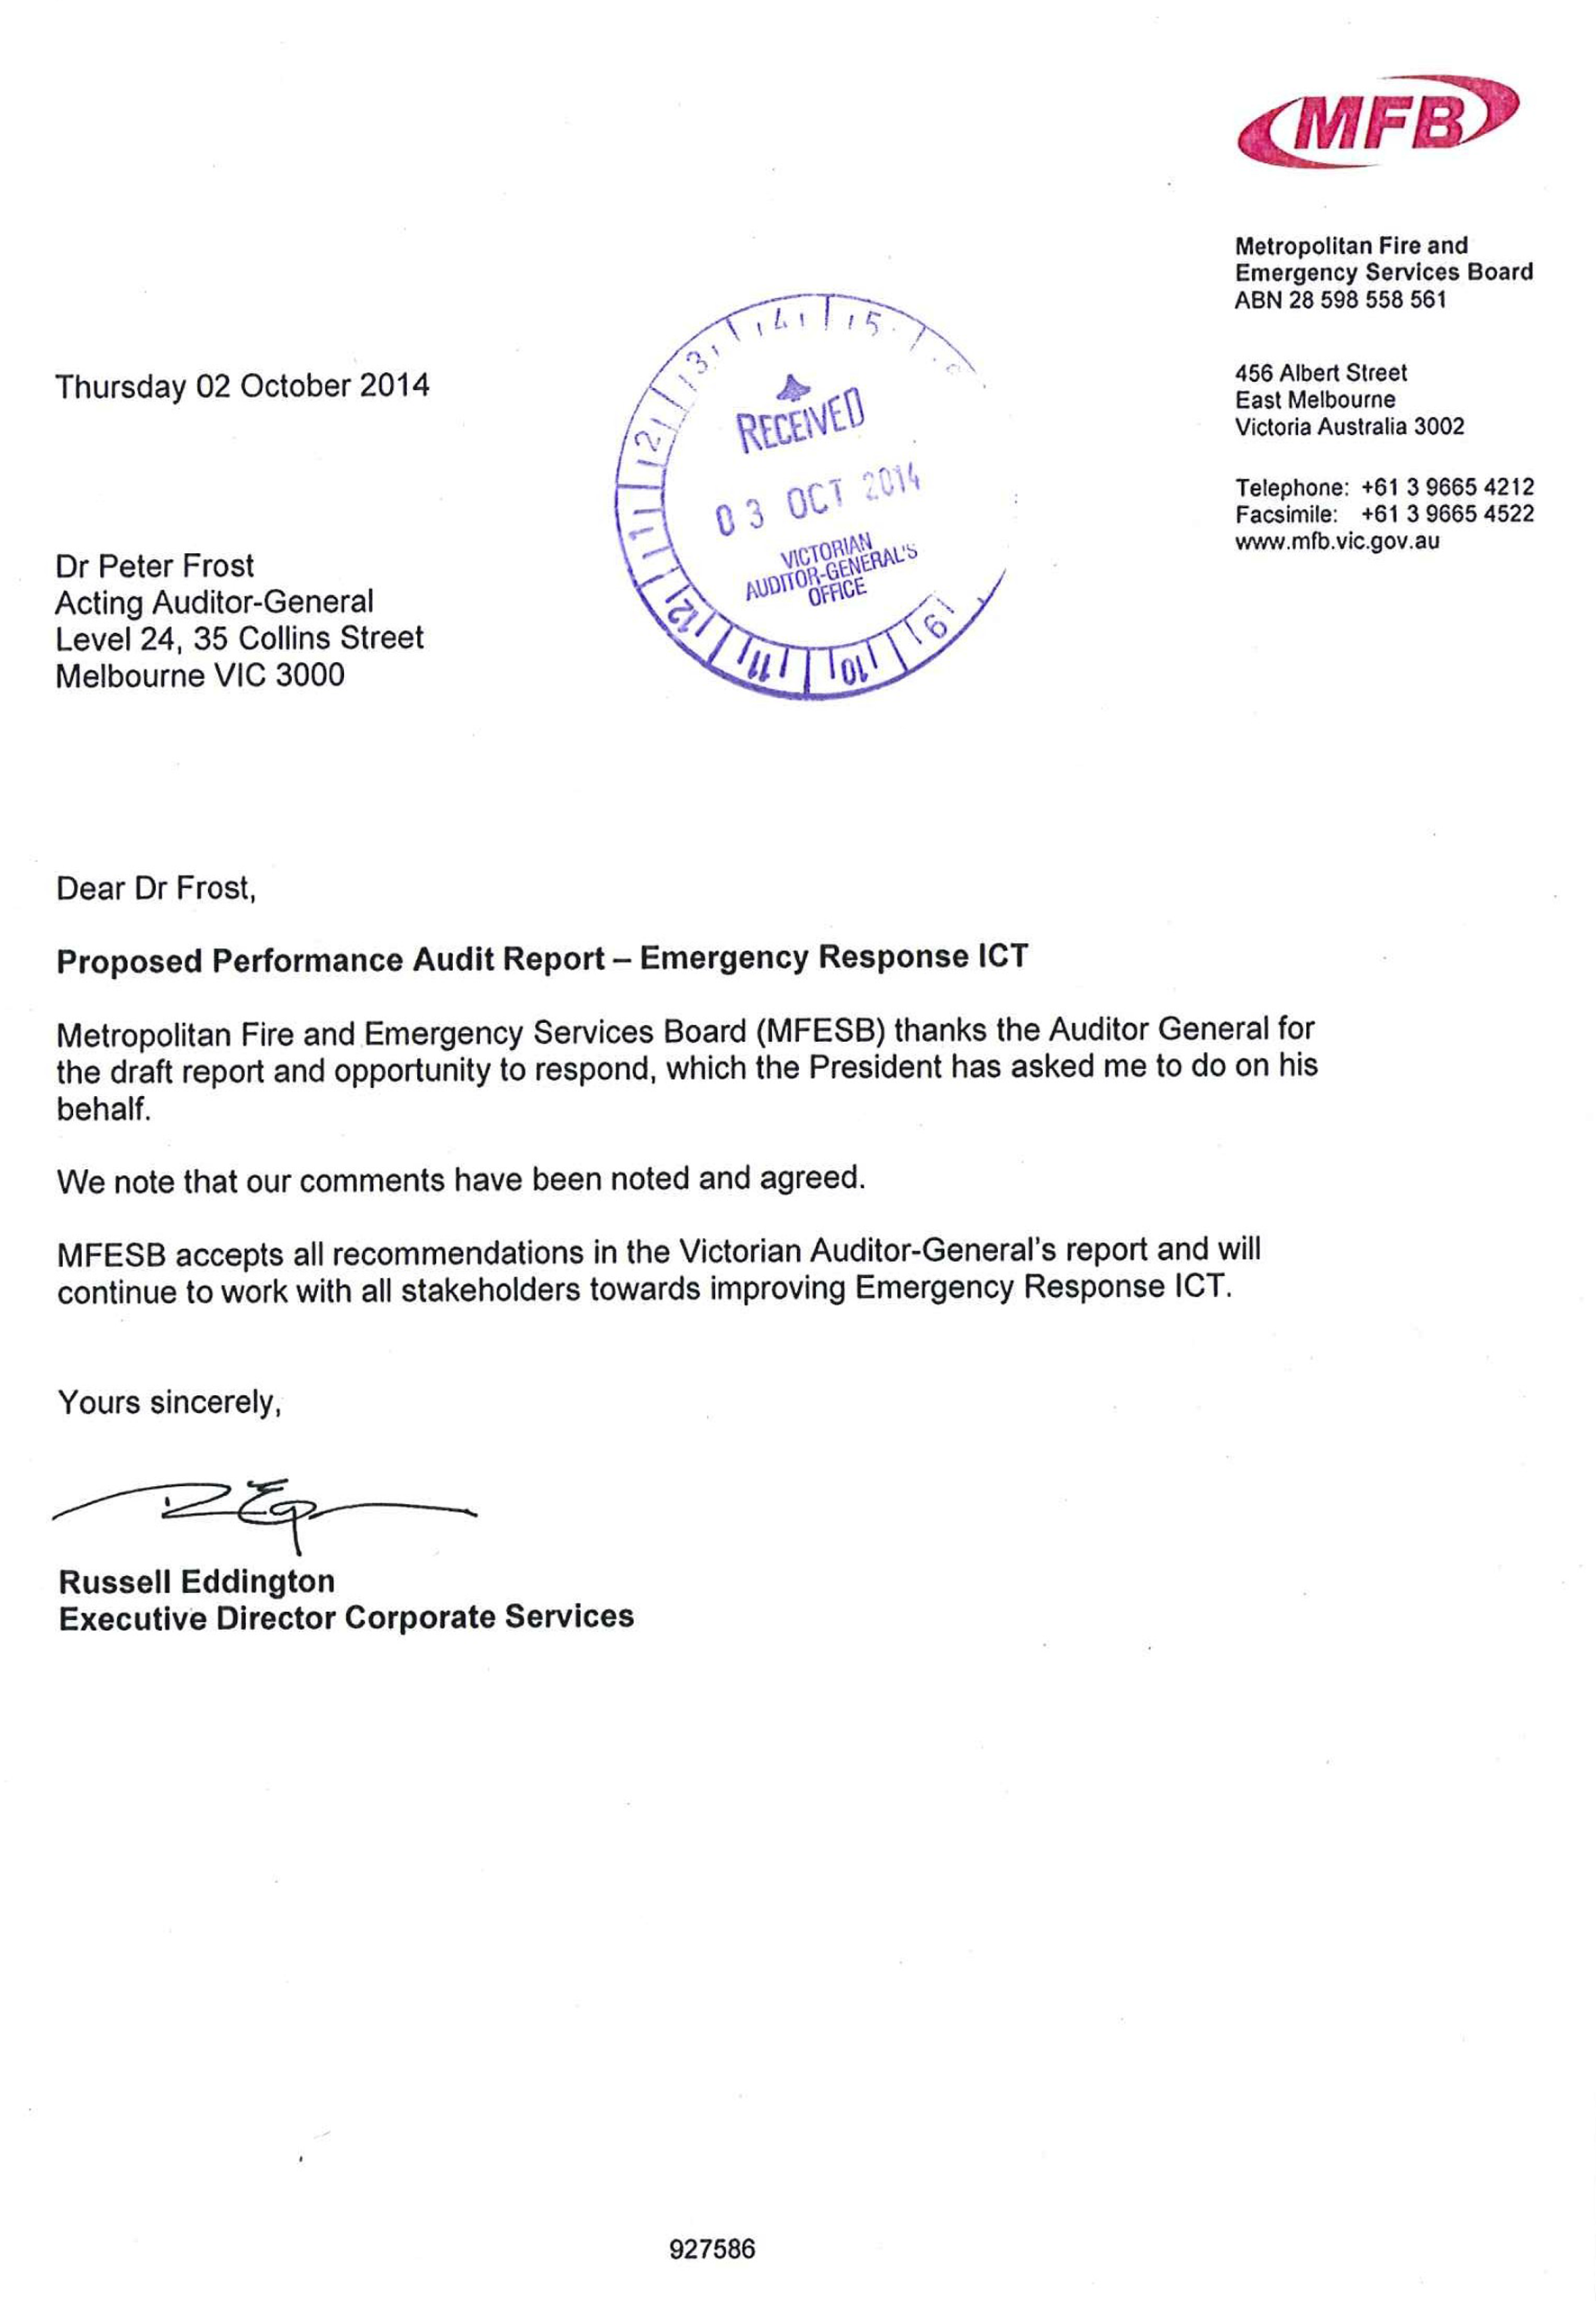 Image shows response provided by the Executive Director Corporate Services, Metropolitan Fire and Emergency Services Board